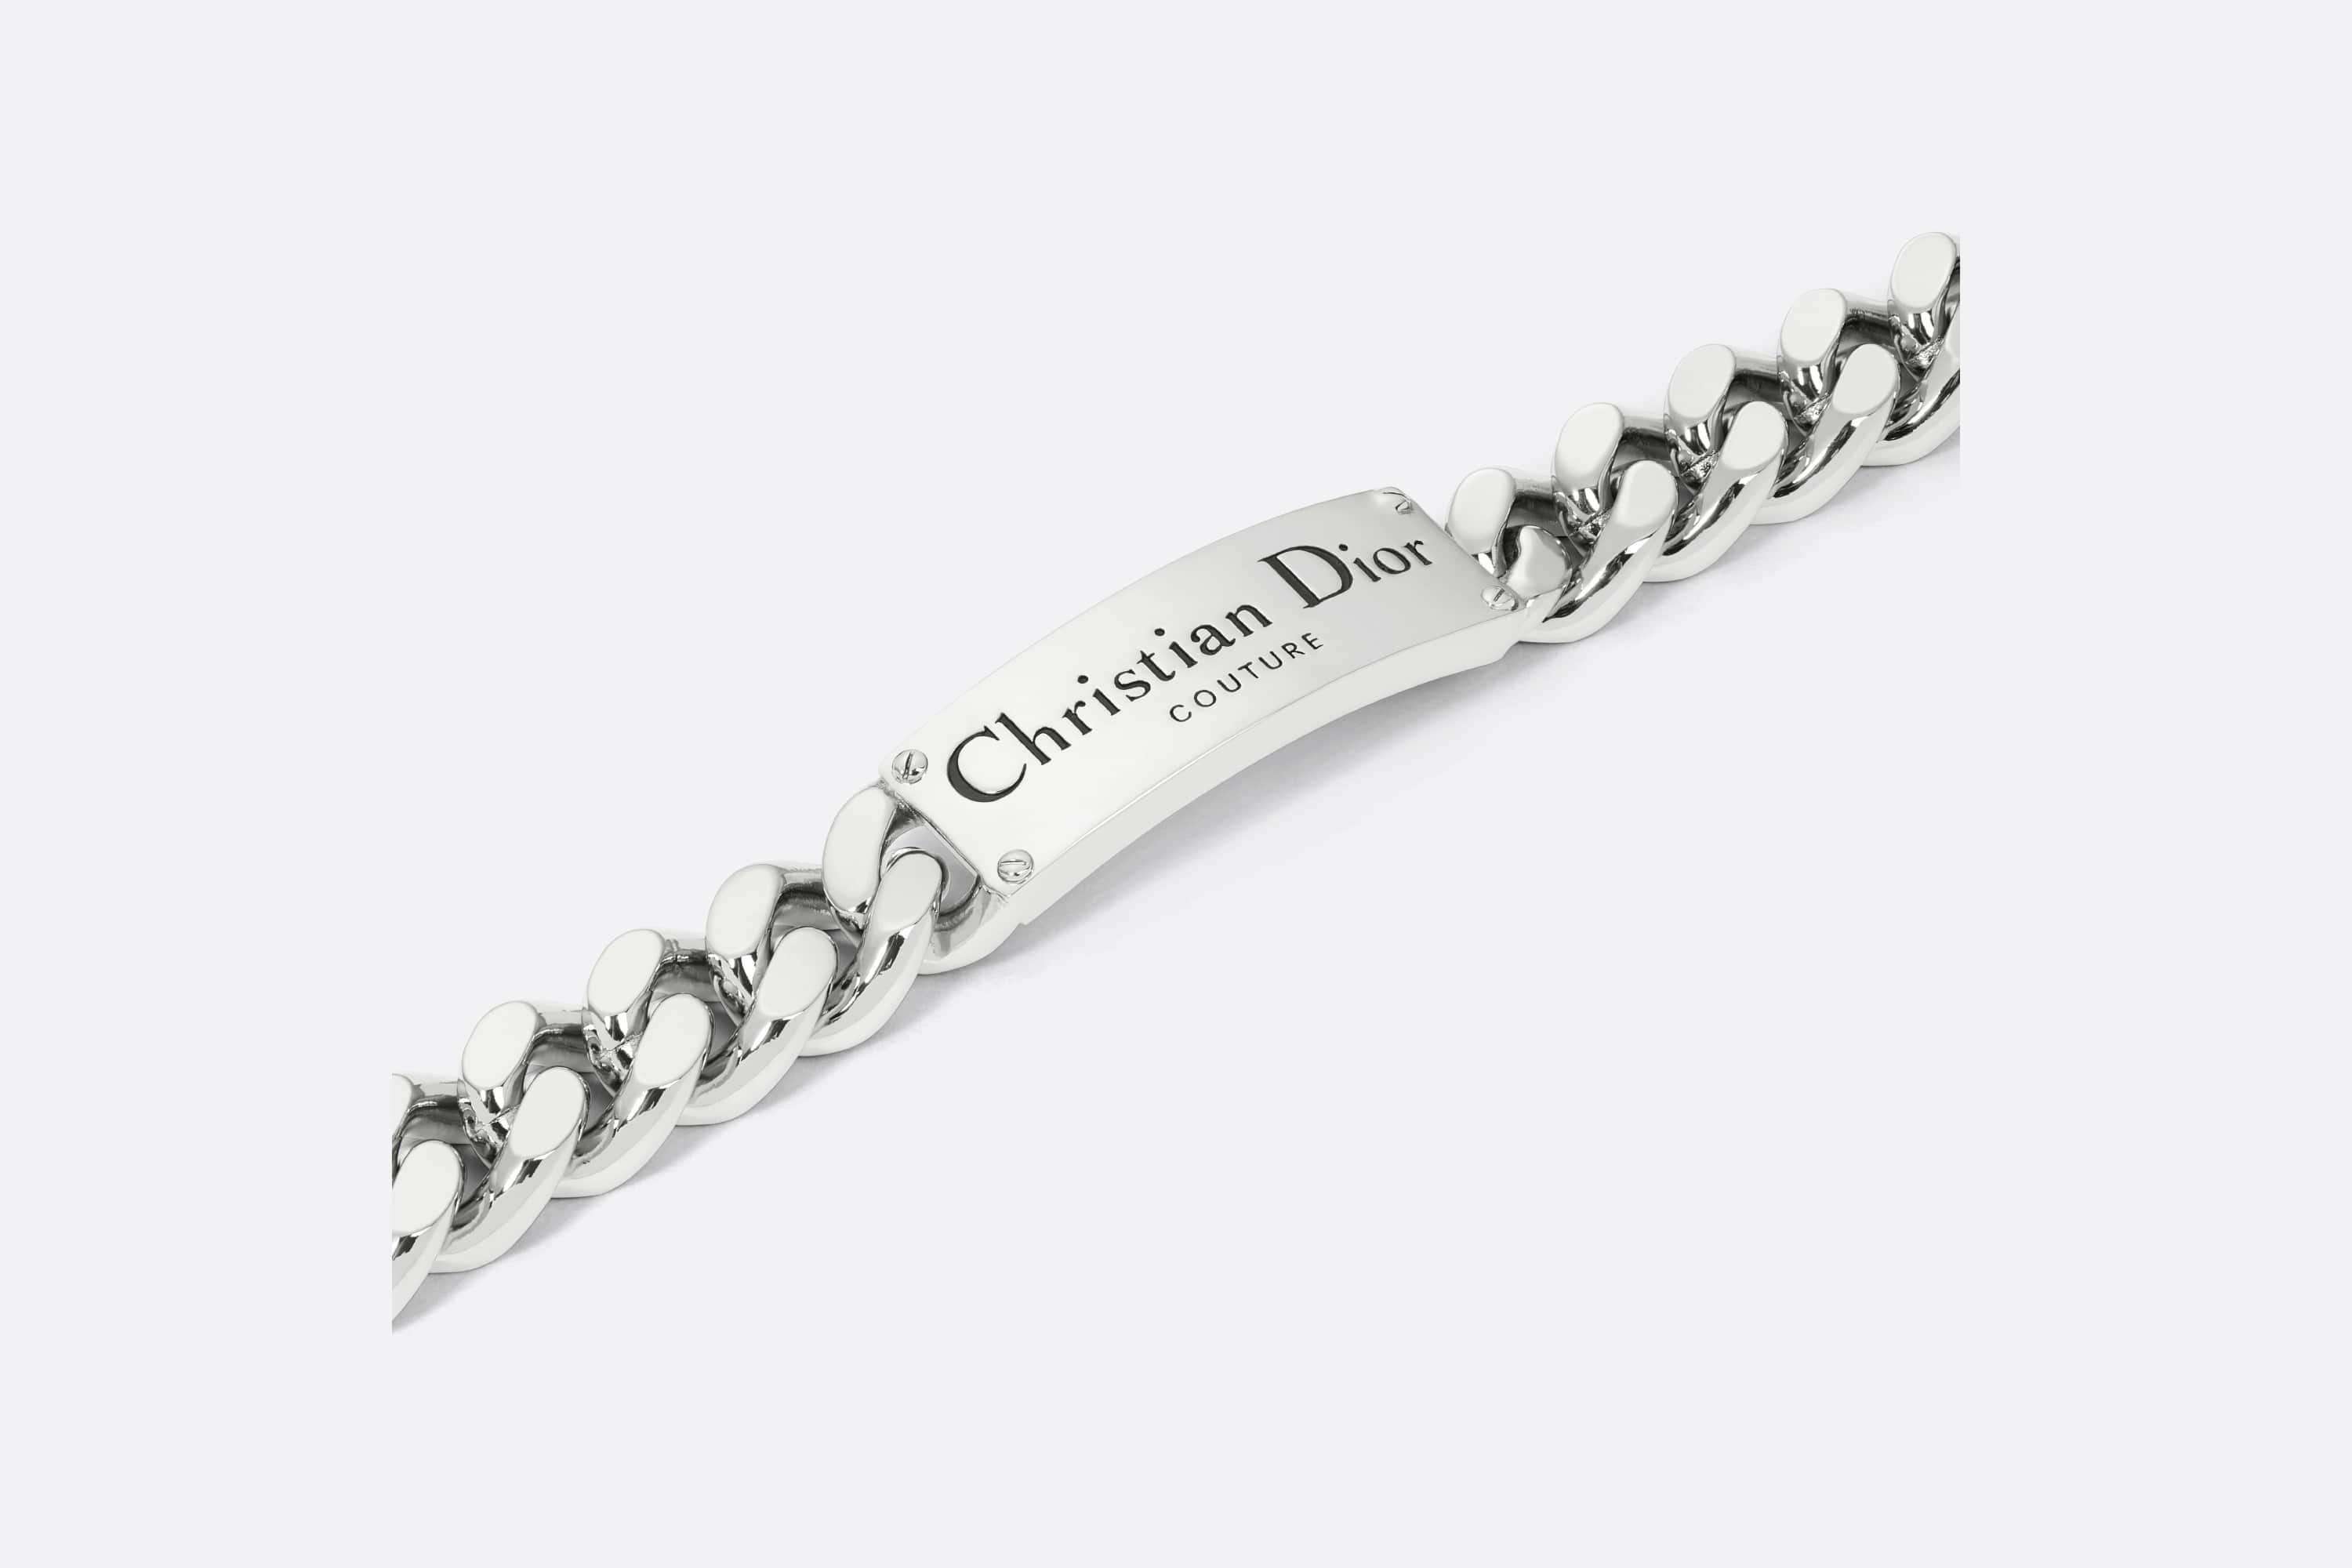 Christian Dior Couture Chain Link Bracelet - 2